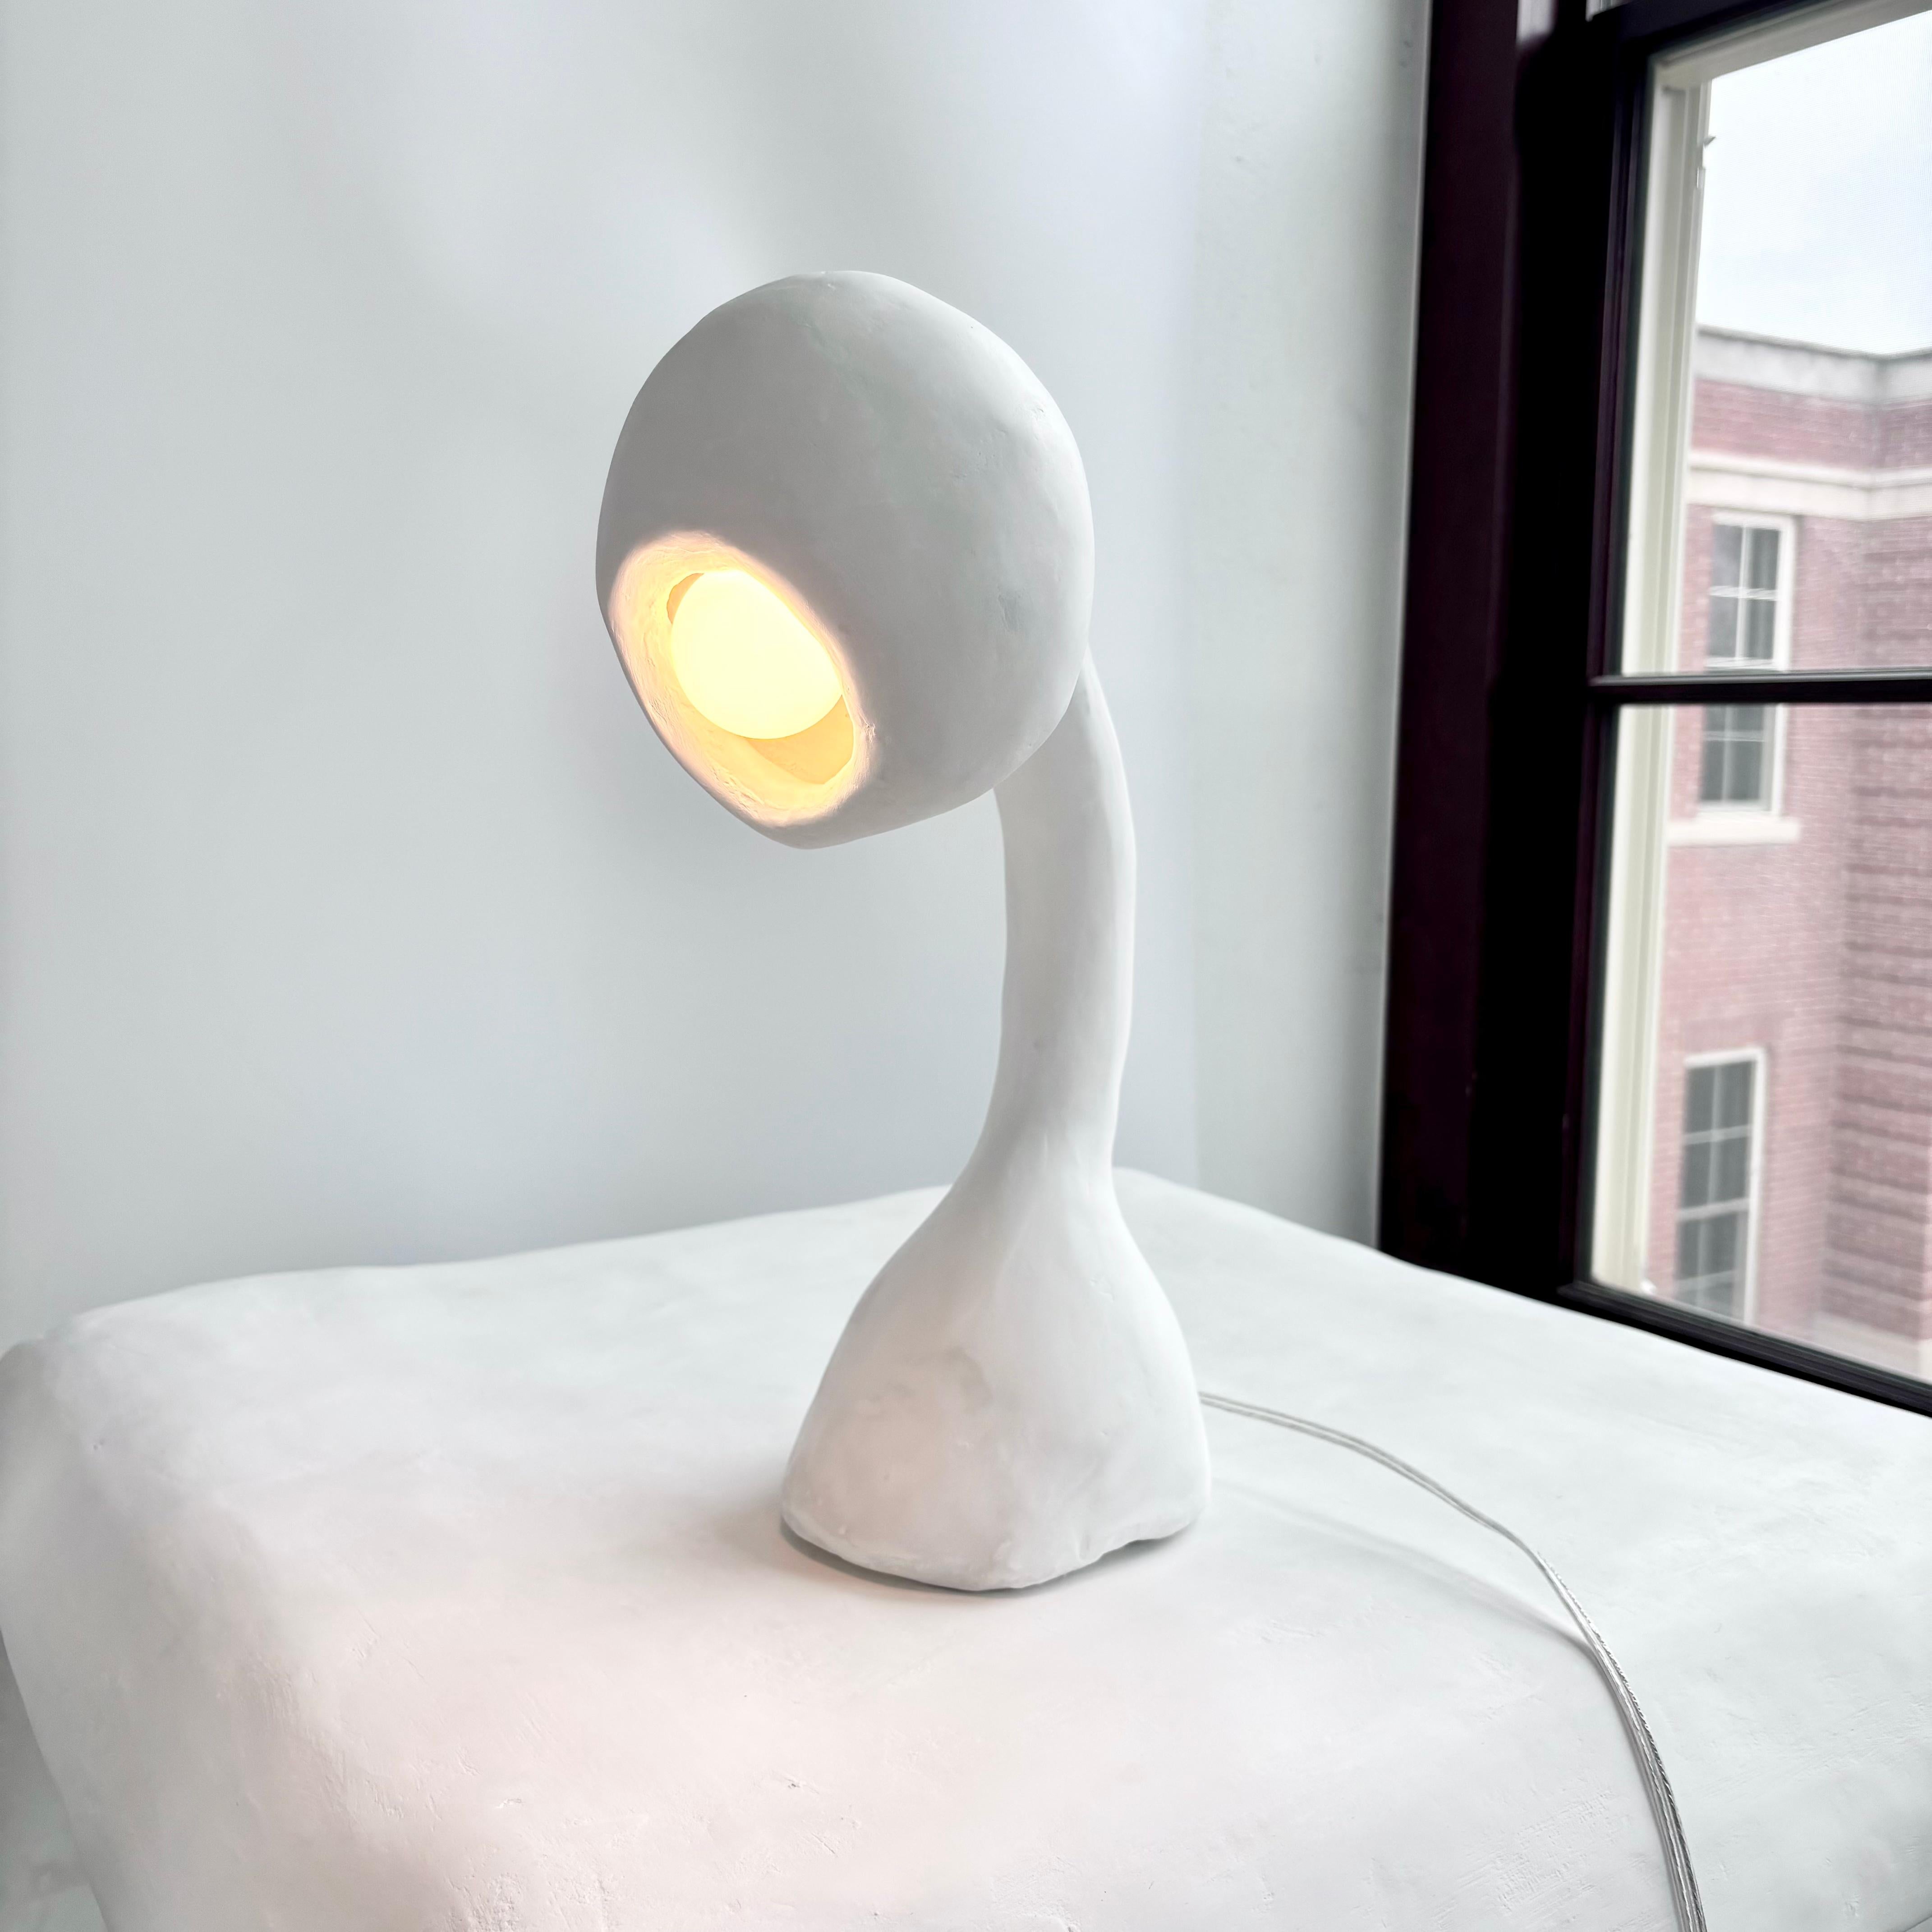 Designed by Studio Chora, 2024.
Biomorphic: ‘bios' meaning life and 'morphe' meaning form. 

The Biomorphic series of organic light sculptures are one-of-a-kind and crafted by hand. This is a second-generation light sculpture, more durable than